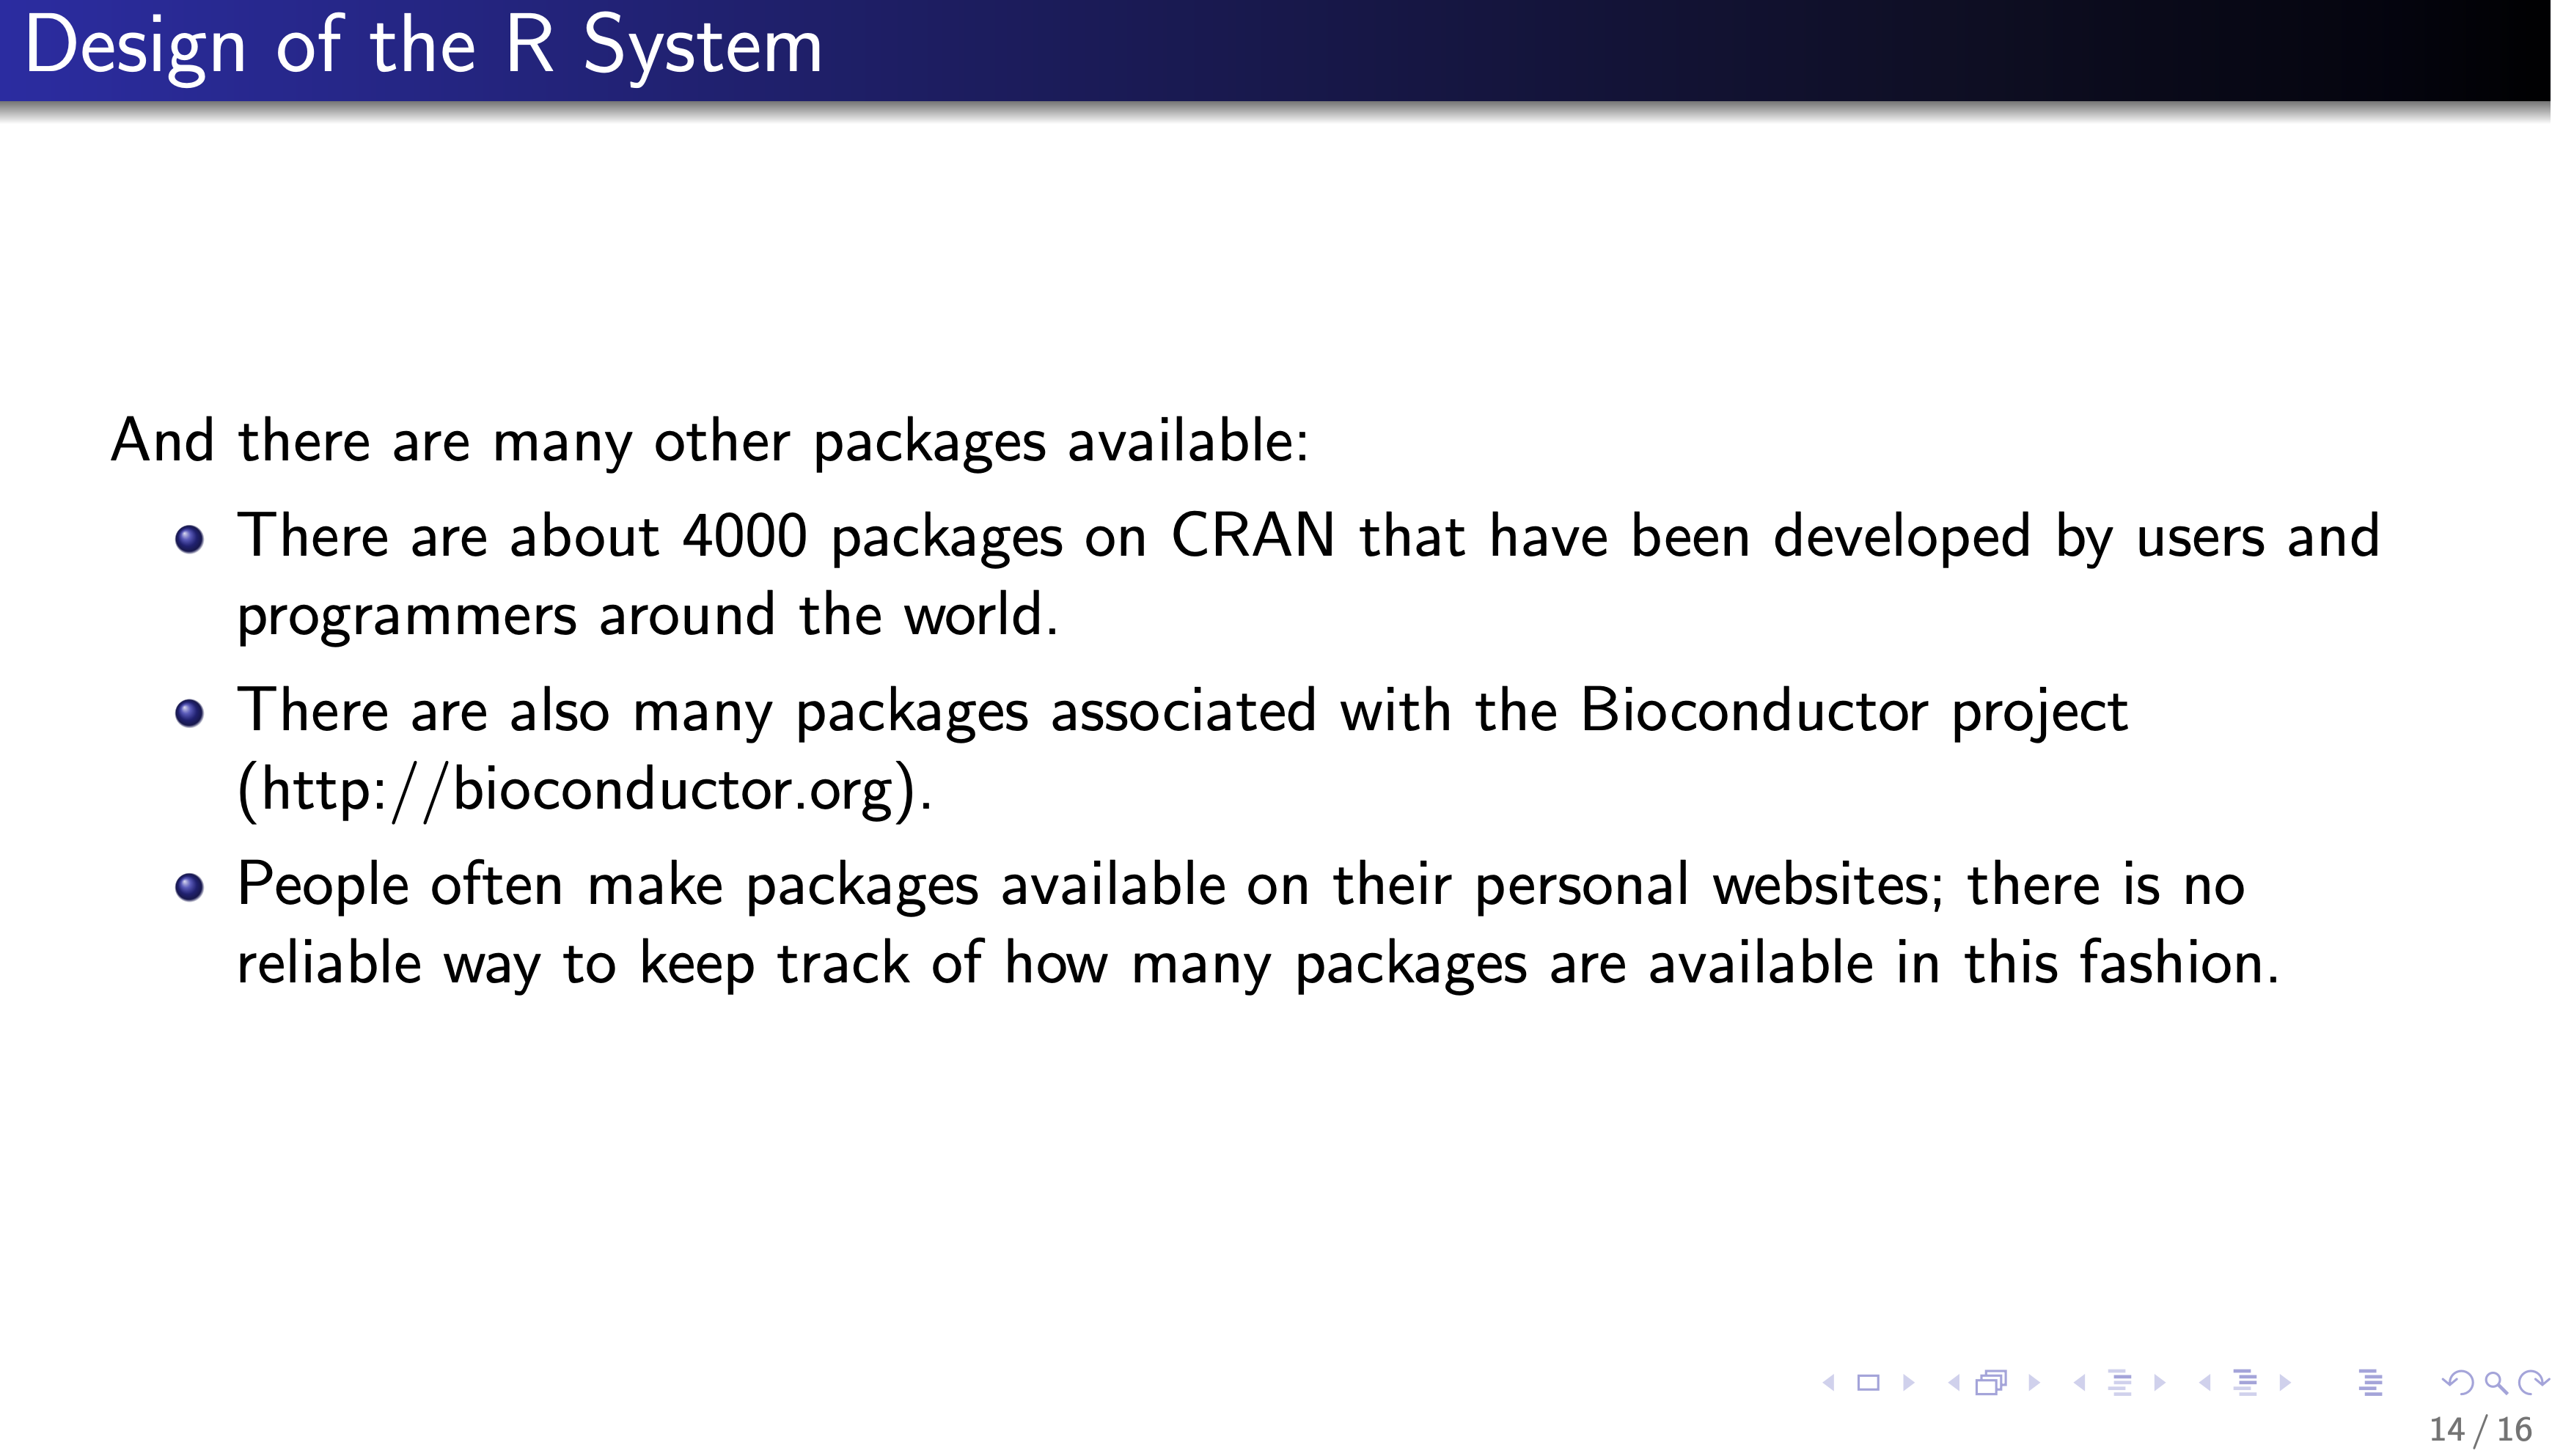 Screenshot from a slide from 2012 showing that R developers share their packages on personal websites